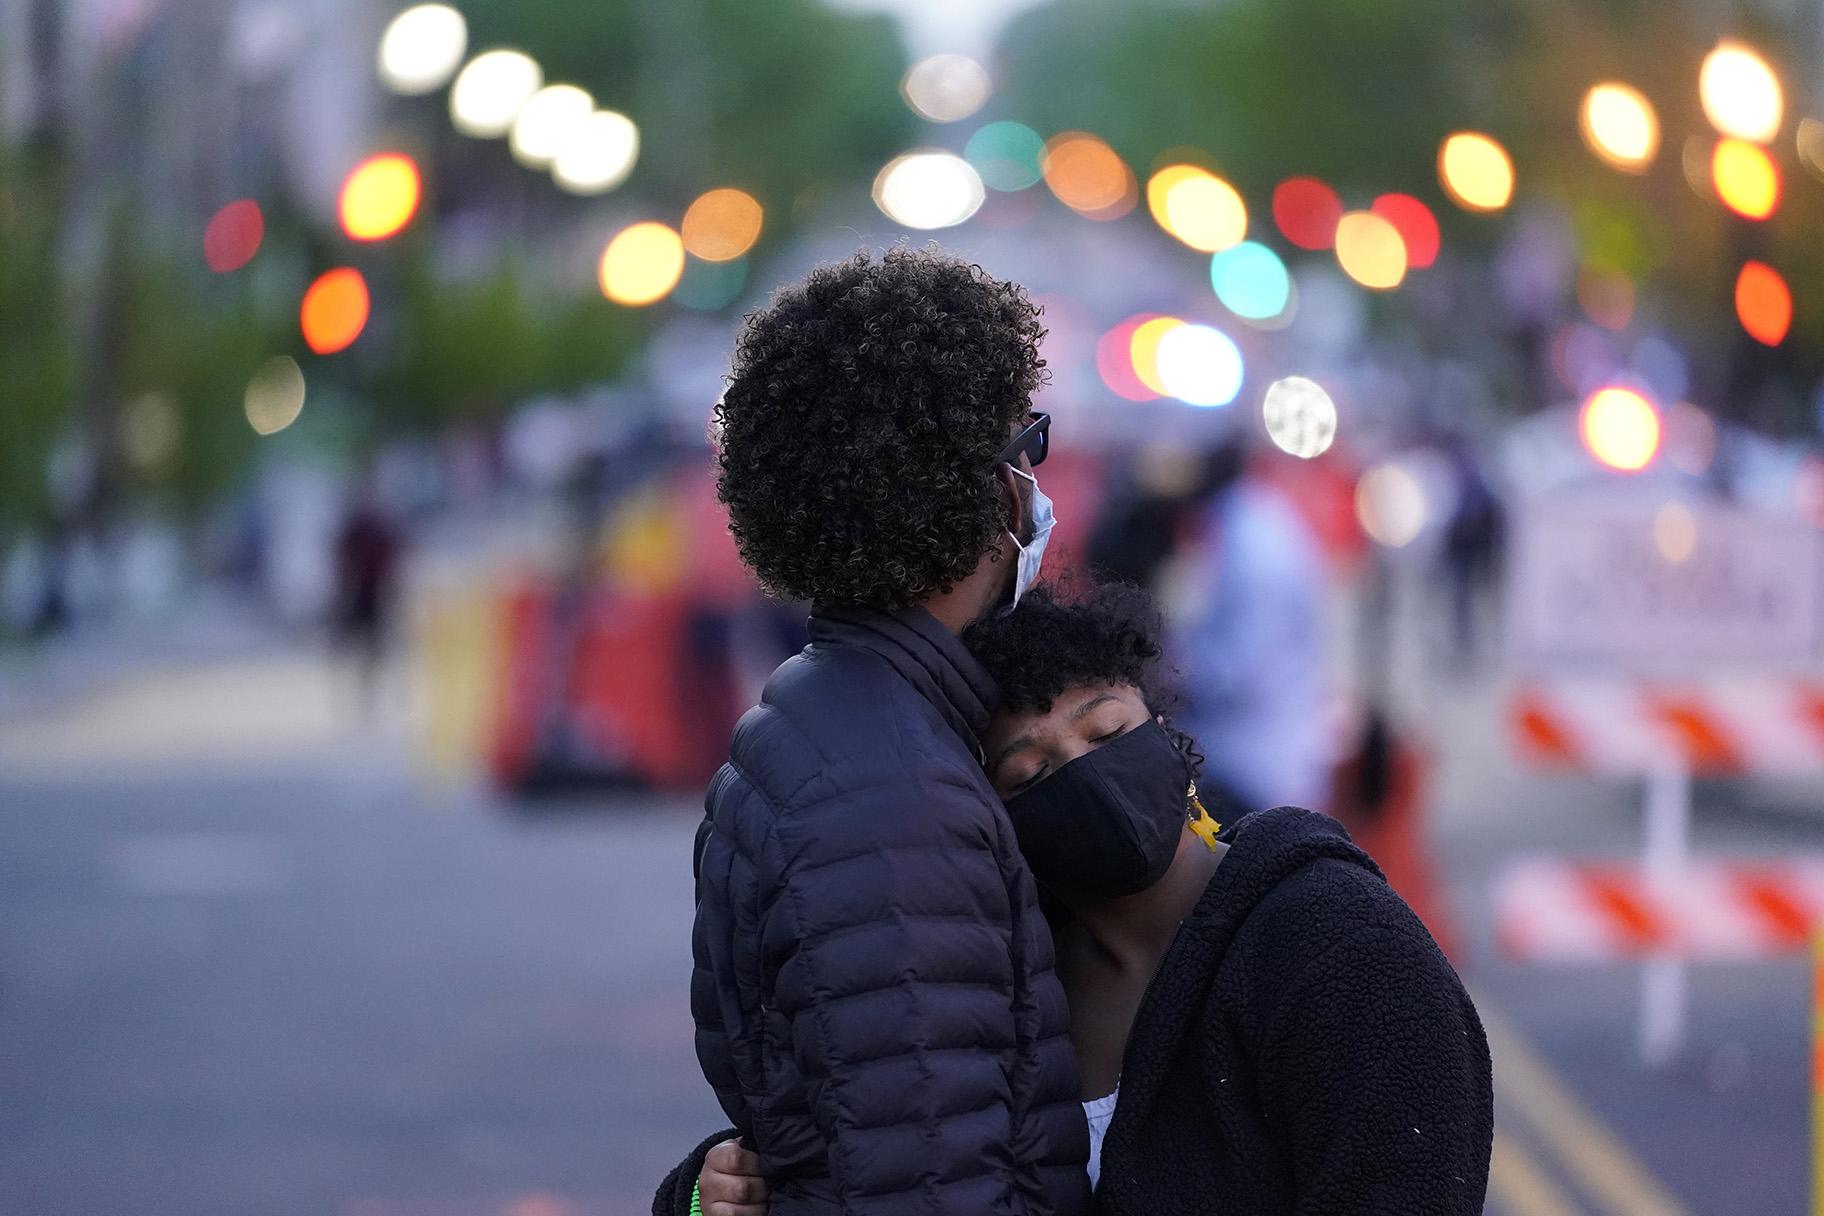 A couple dances at Black Lives Matter Plaza near the White House on Tuesday, April 20, 2021, in Washington, after the verdict in Minneapolis, in the murder trial against former Minneapolis police officer Derek Chauvin was announced. (AP Photo / Alex Brandon)